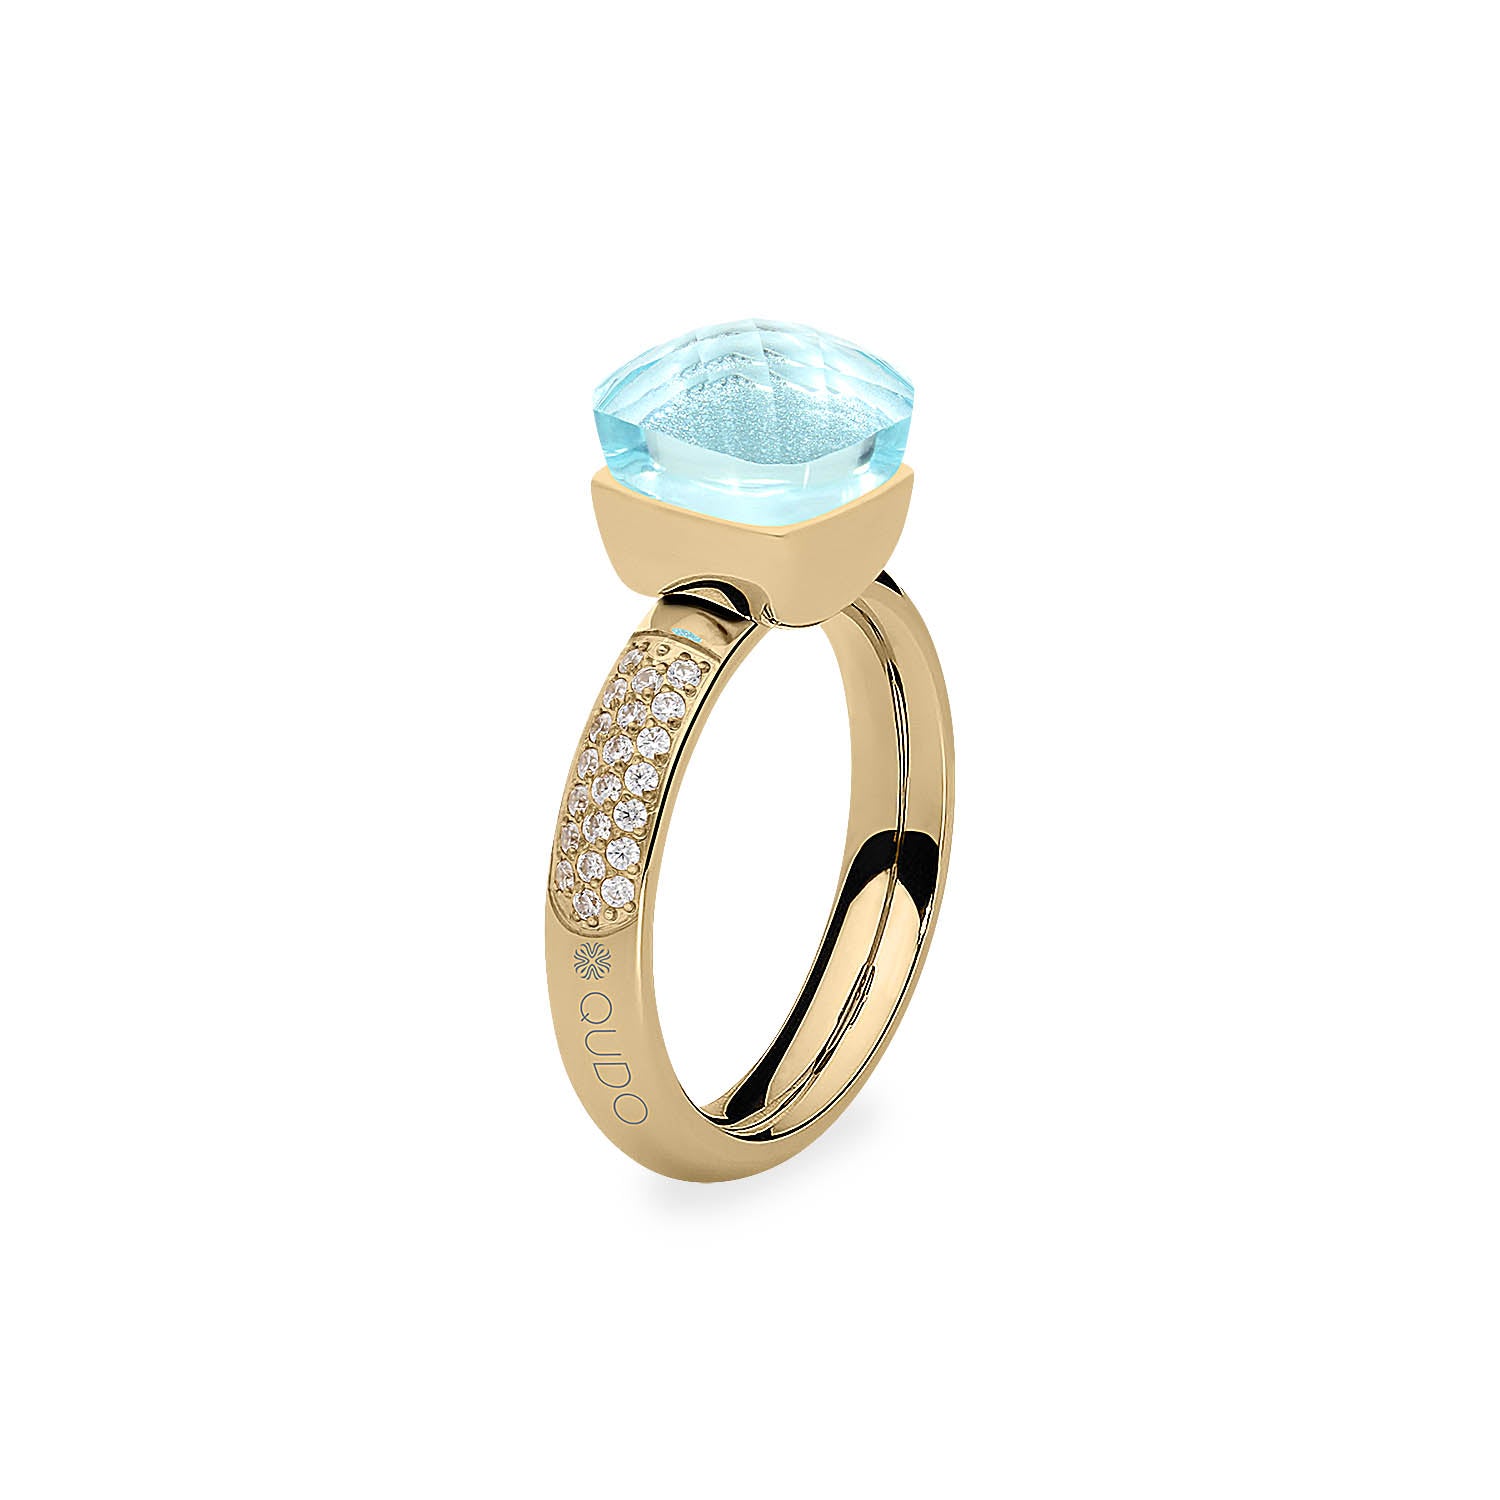 Firenze Deluxe Ring - Shades of Blue - Gold